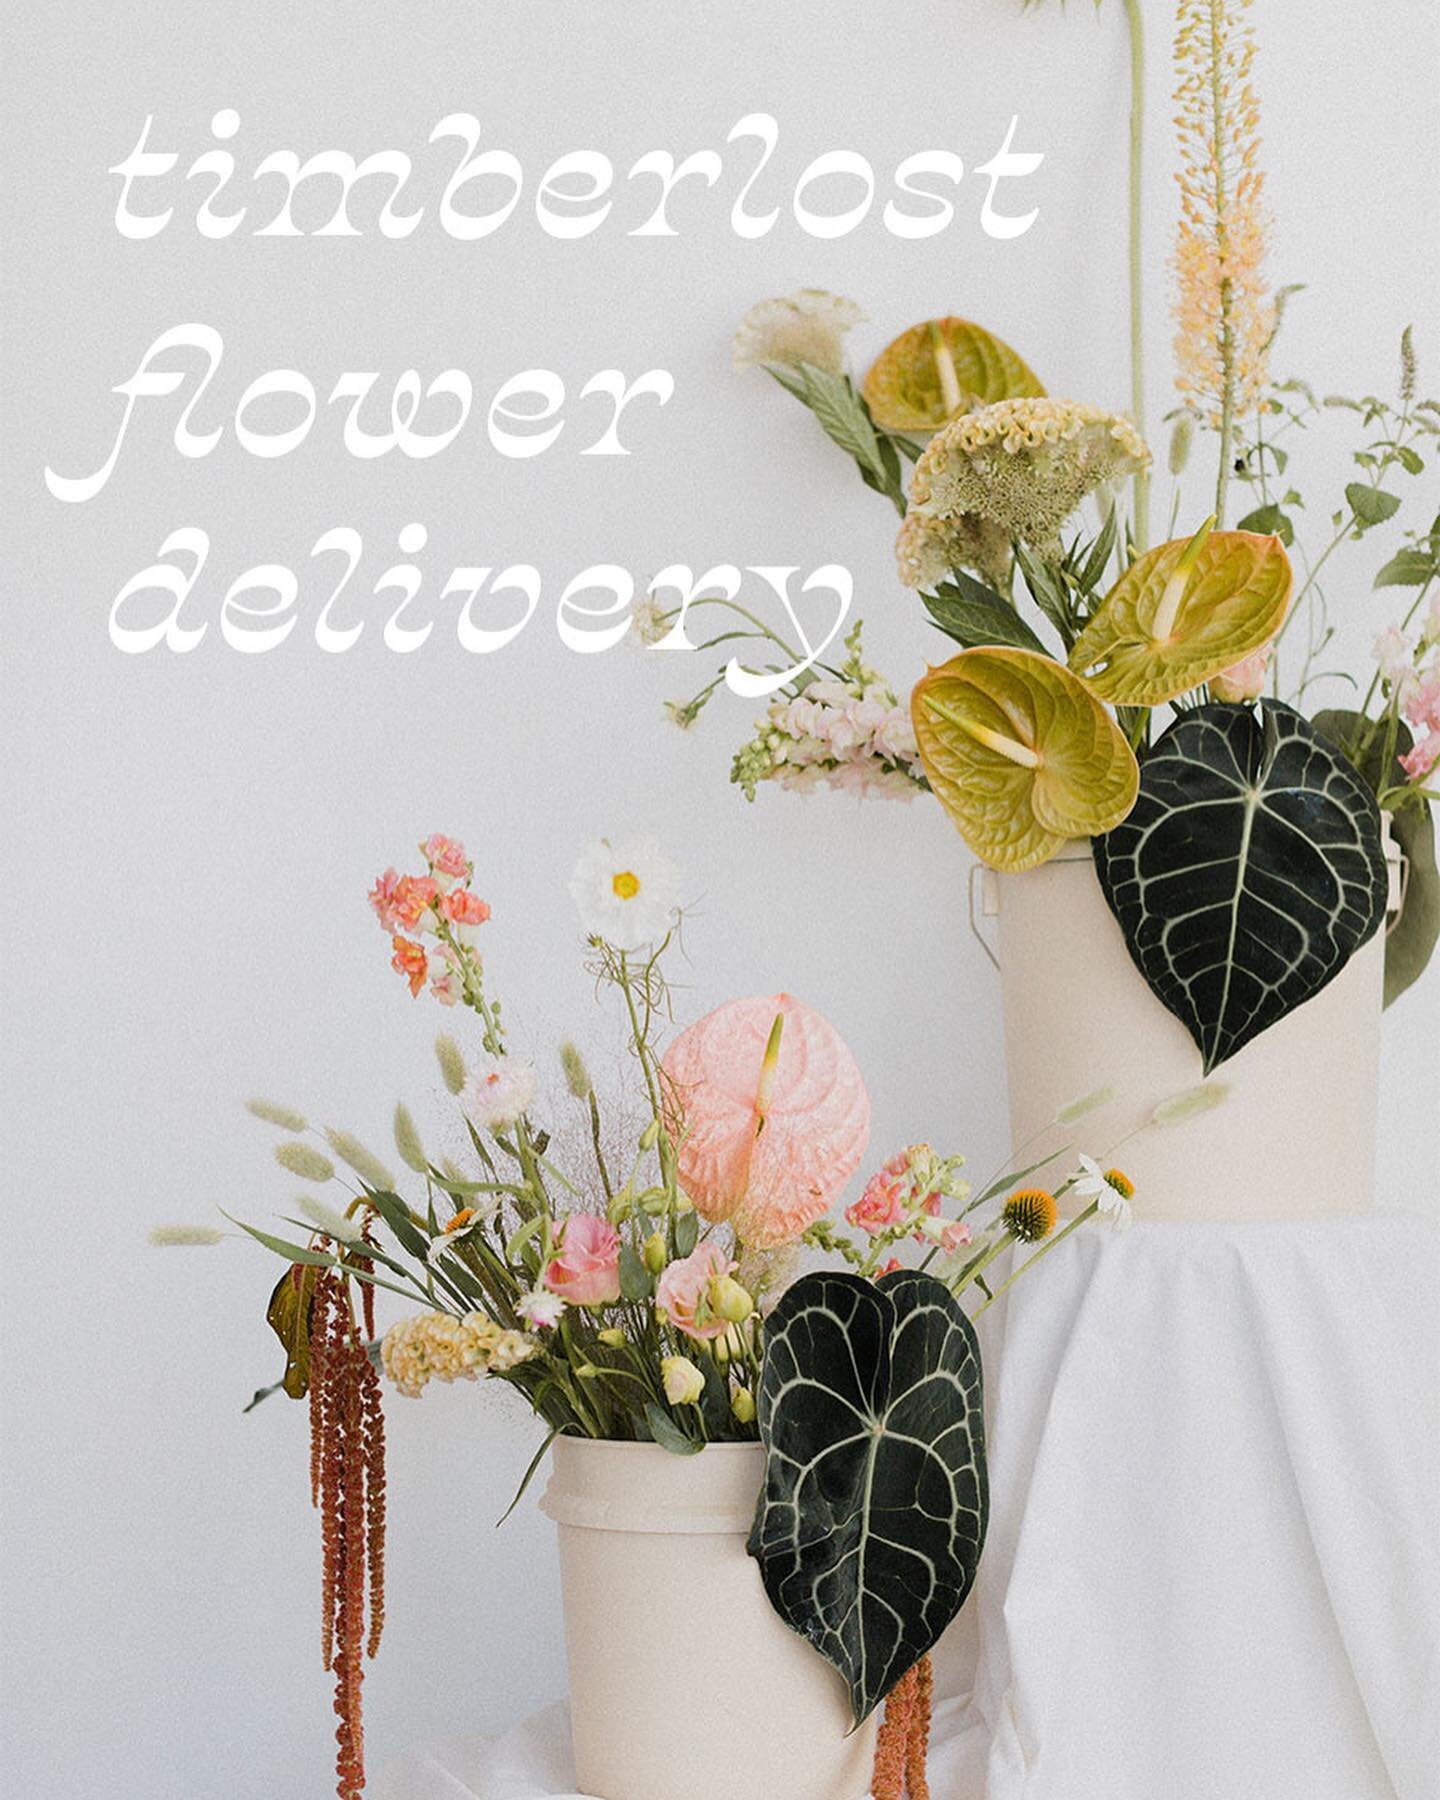 TIMBERLOST FLOWER DELIVERIES  NOW OPEN! 

Hey folks! It&rsquo;s a big day! Today we are launching our one of a kind curated flower bucket program ~ 

Many people have asked: &ldquo;Lauren, where do you get your flowers?&rdquo; Well, now we will deliv